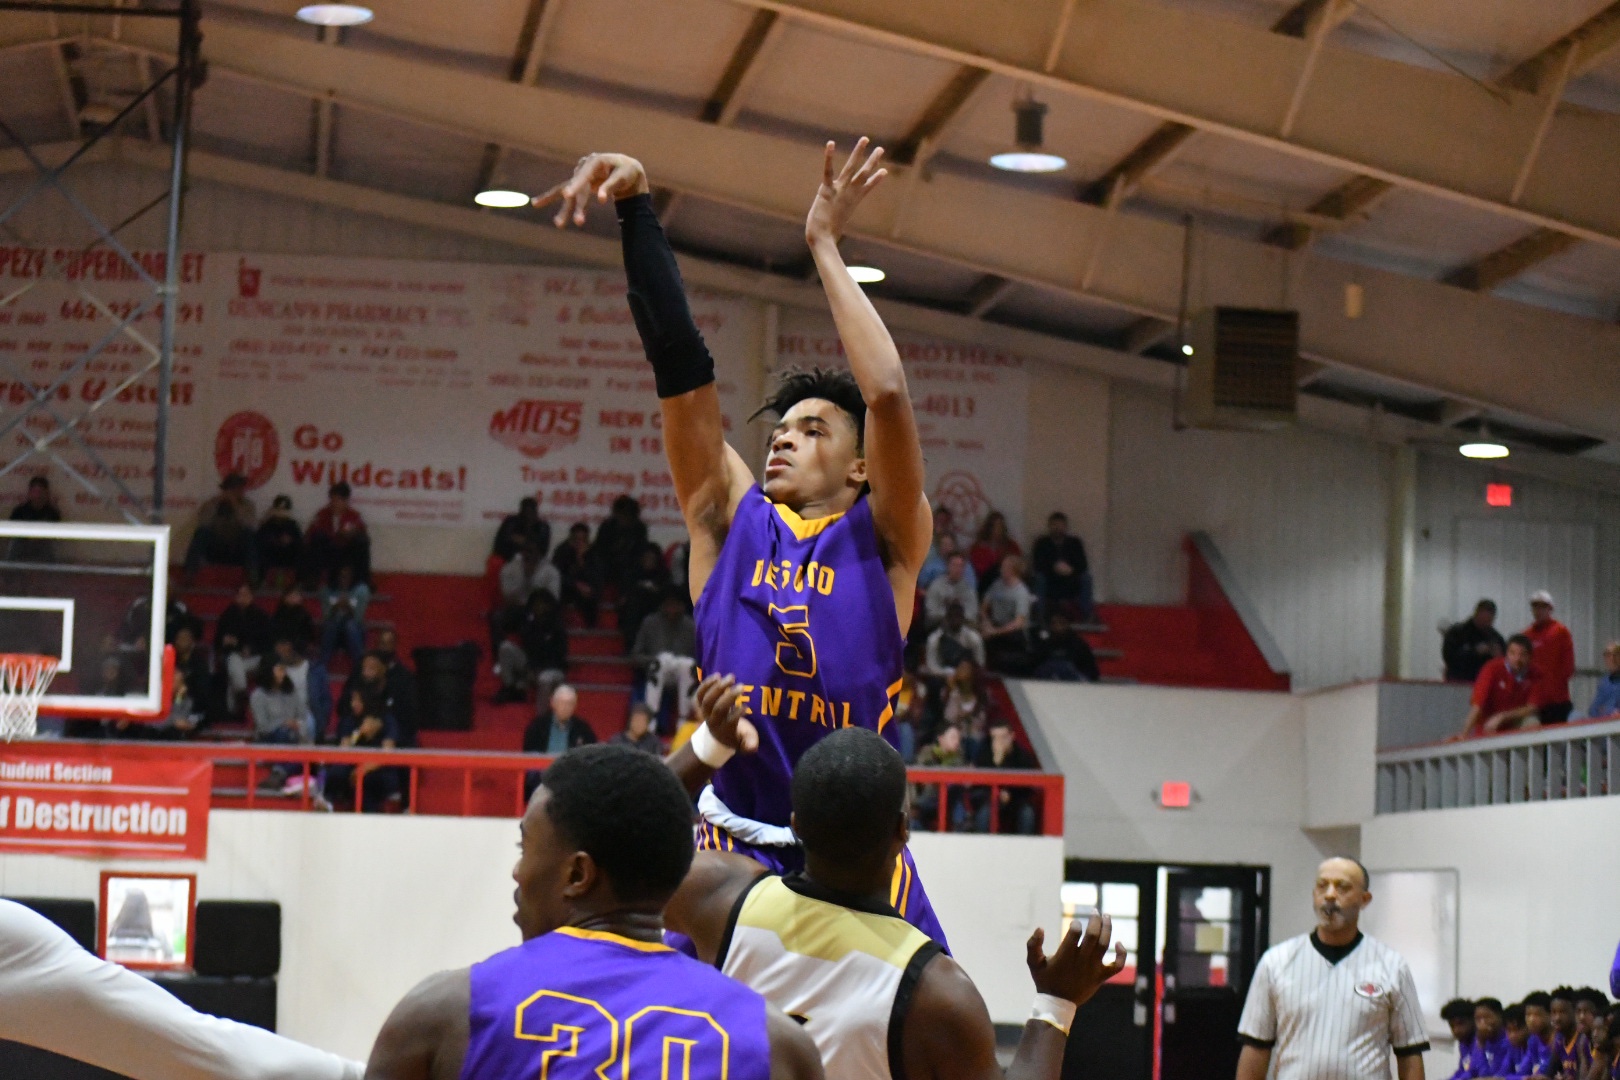 DeSoto Central gets big win at Sikes Memorial tournament